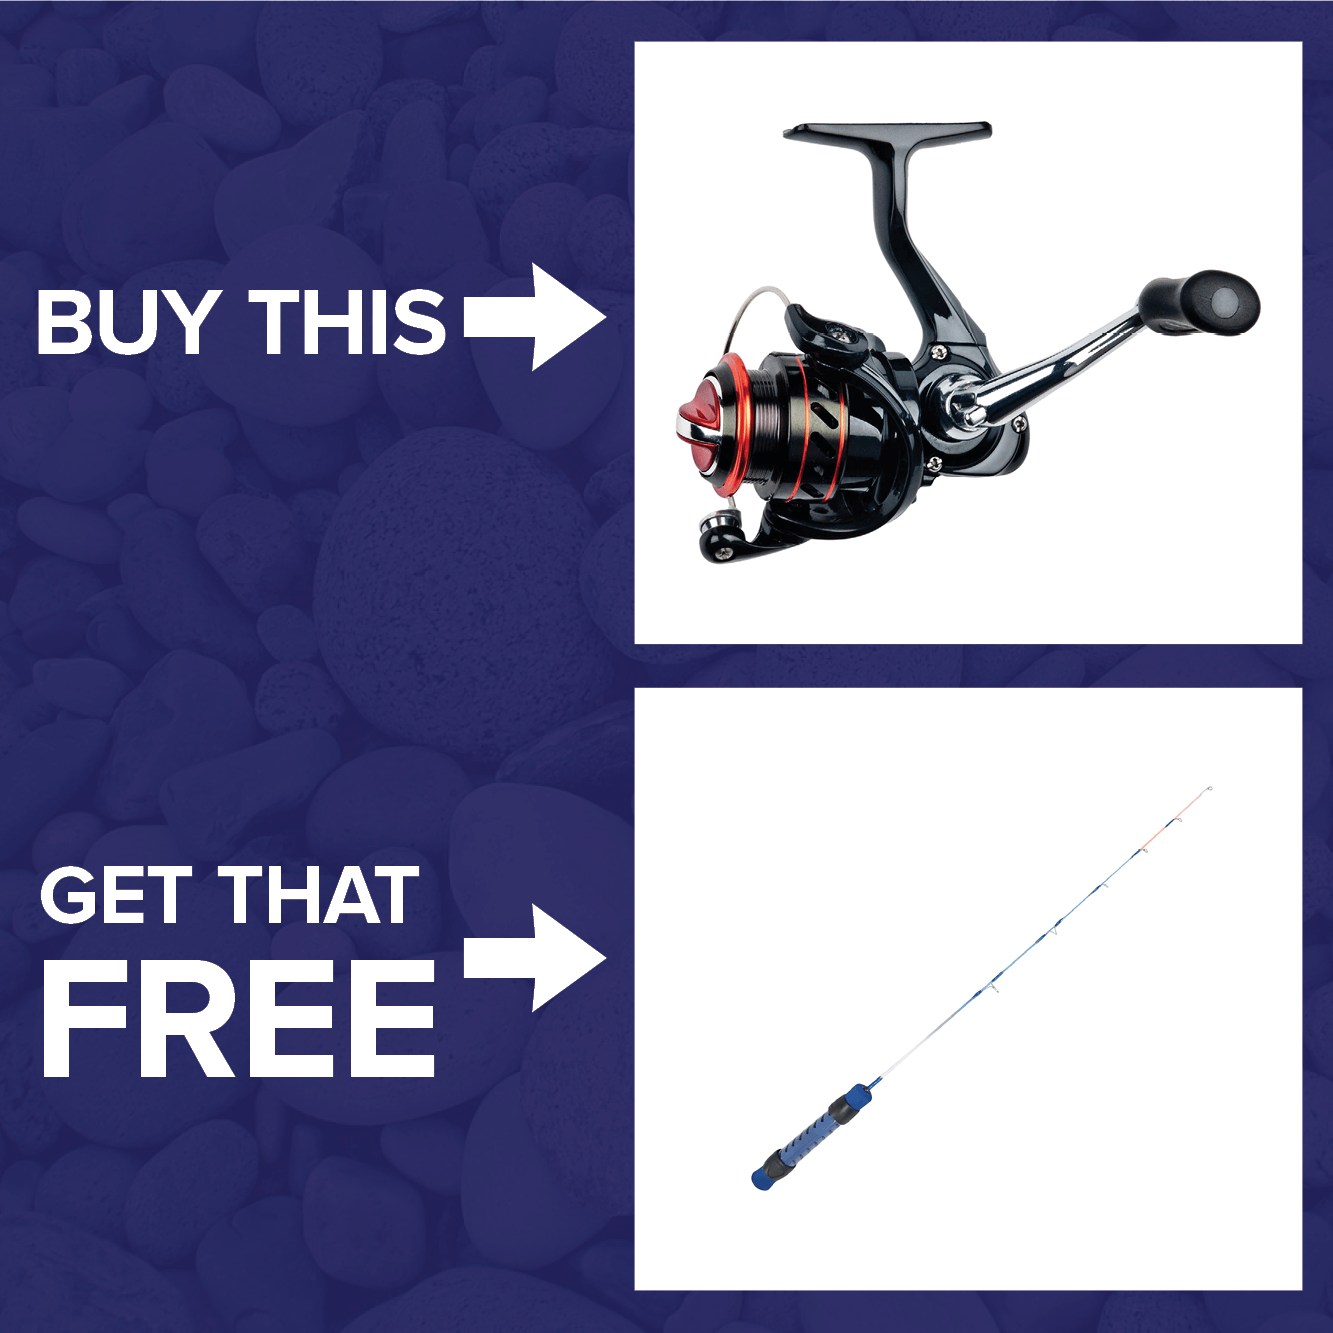 Get a FREE HT Enterprises Ice Blue Super Flex Ice Fishing Rod when you buy a Frabill Bro Series Ice Spinning Reel